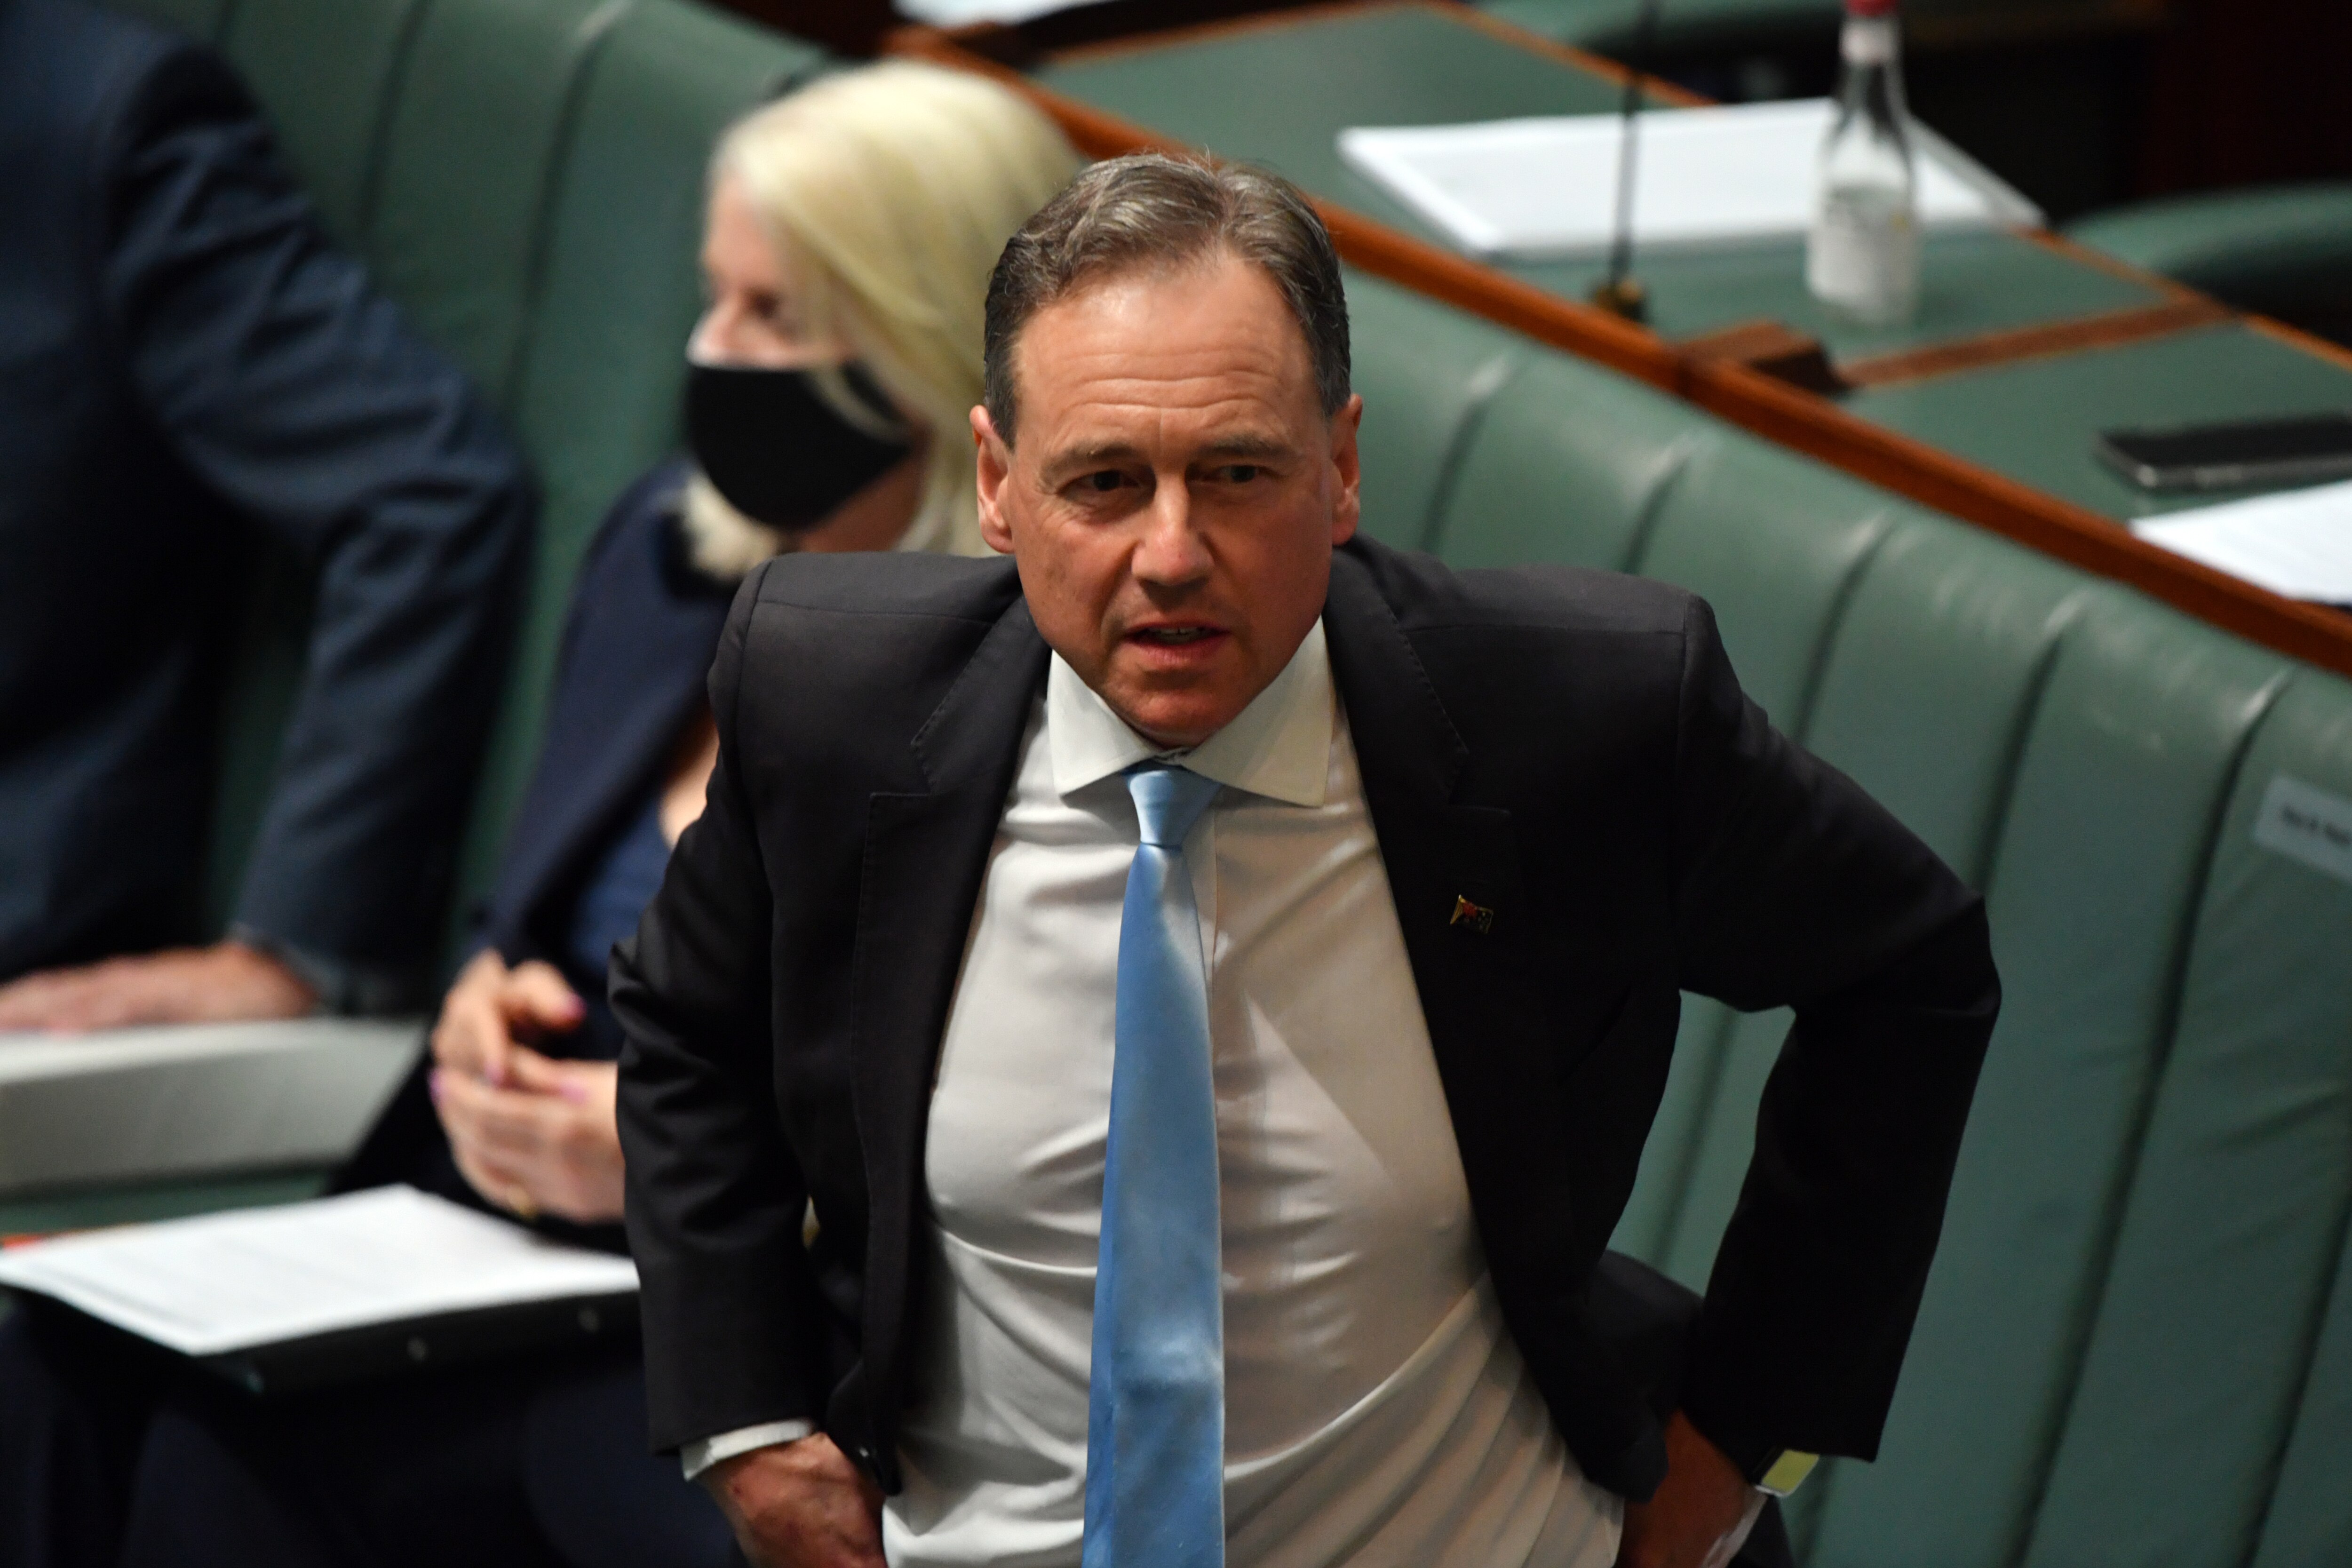 Minister for Health Greg Hunt was first elected in 2001.